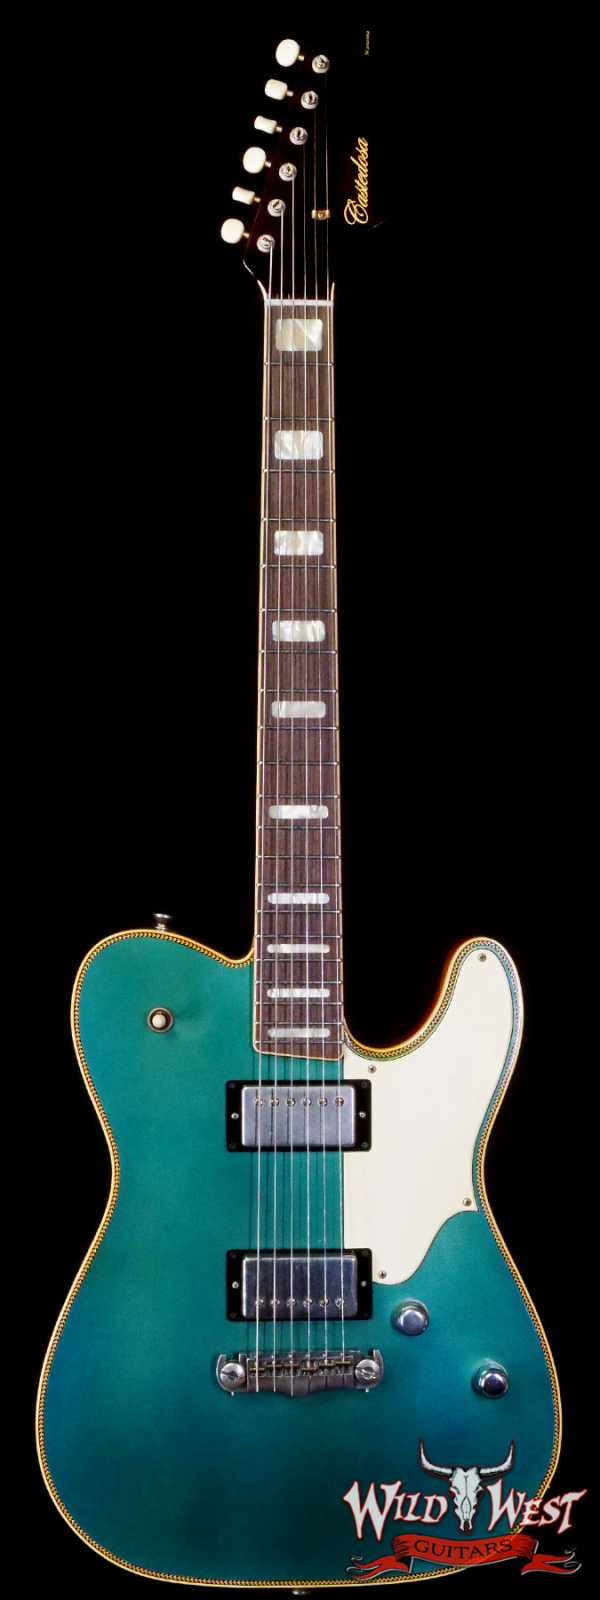 Castedosa Guitars Marianna Carve Top Aged Ocean Turquoise Metallic Natural Back Built & Relic by Carlos Lopez